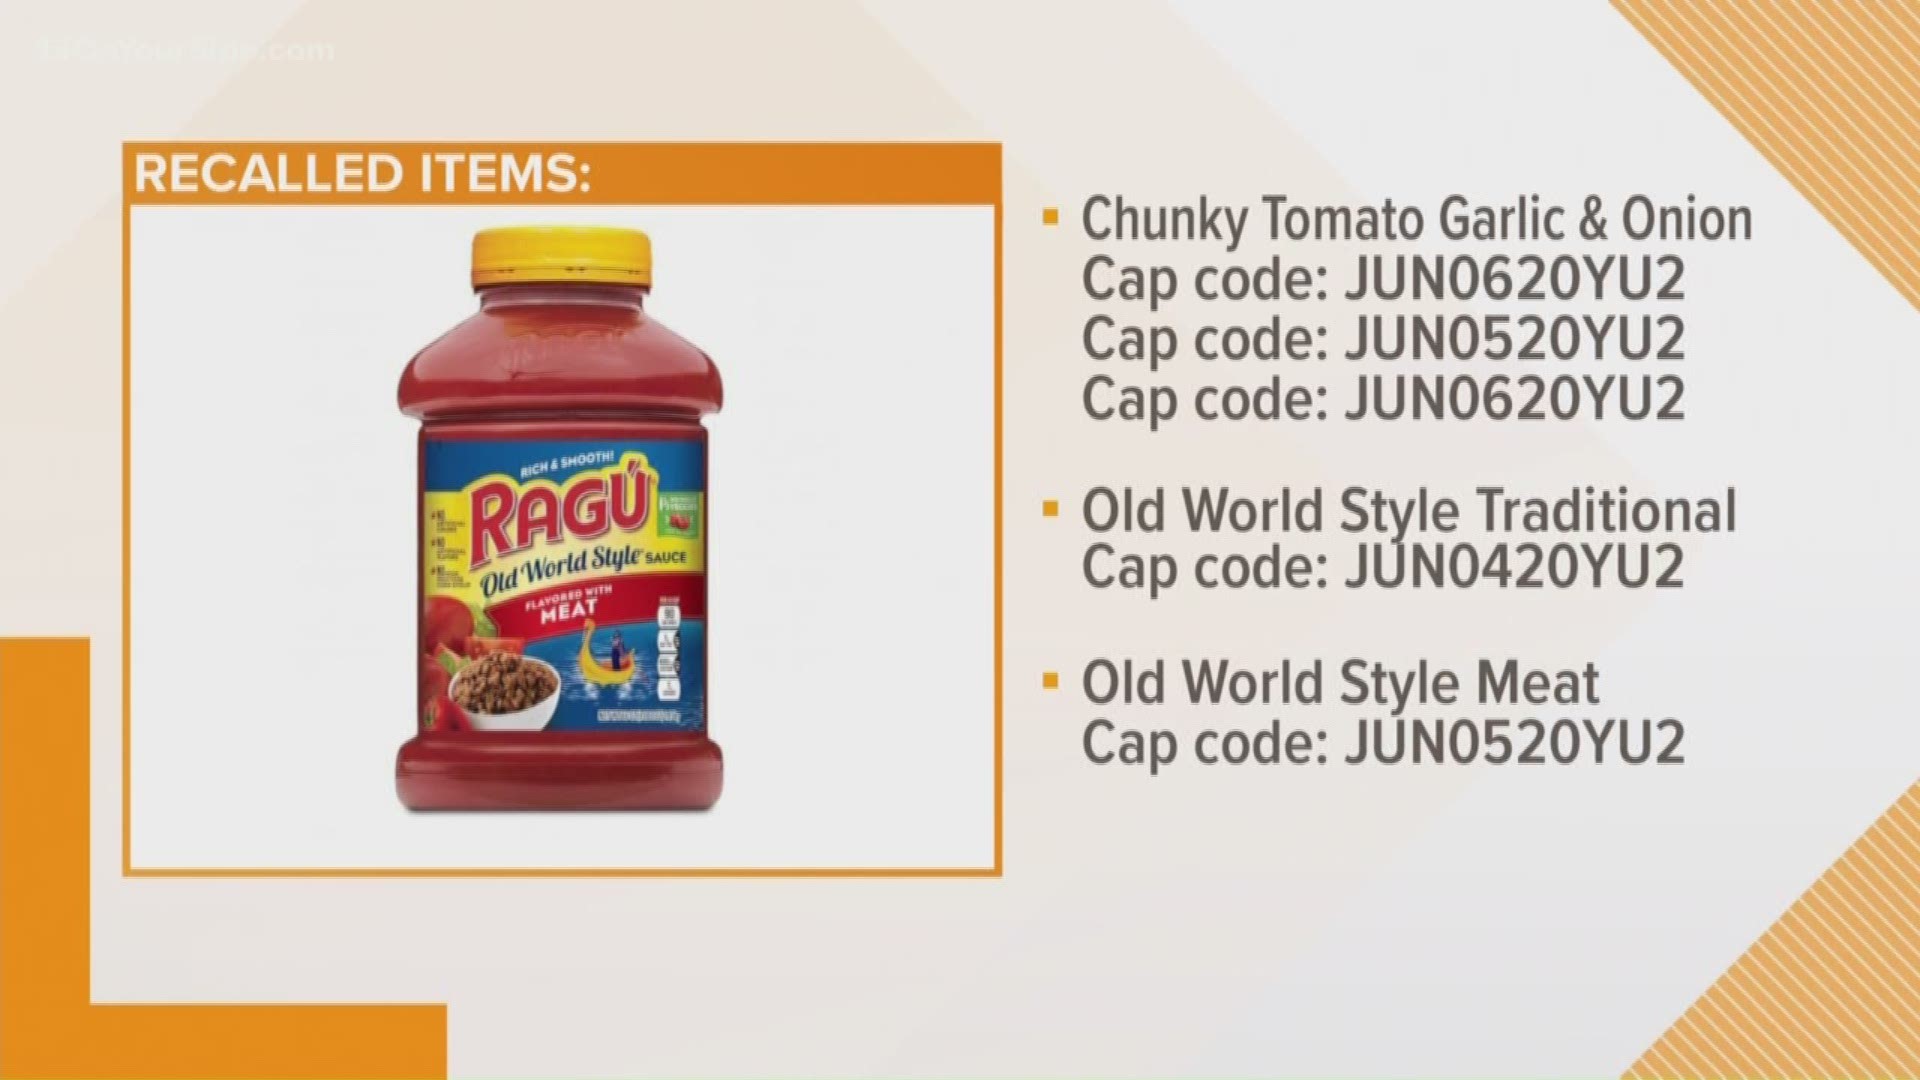 Mizkan America is announcing the voluntary recall of certain production codes of its Ragu pasta sauces in the United States because the sauce may contain fragments of plastic.